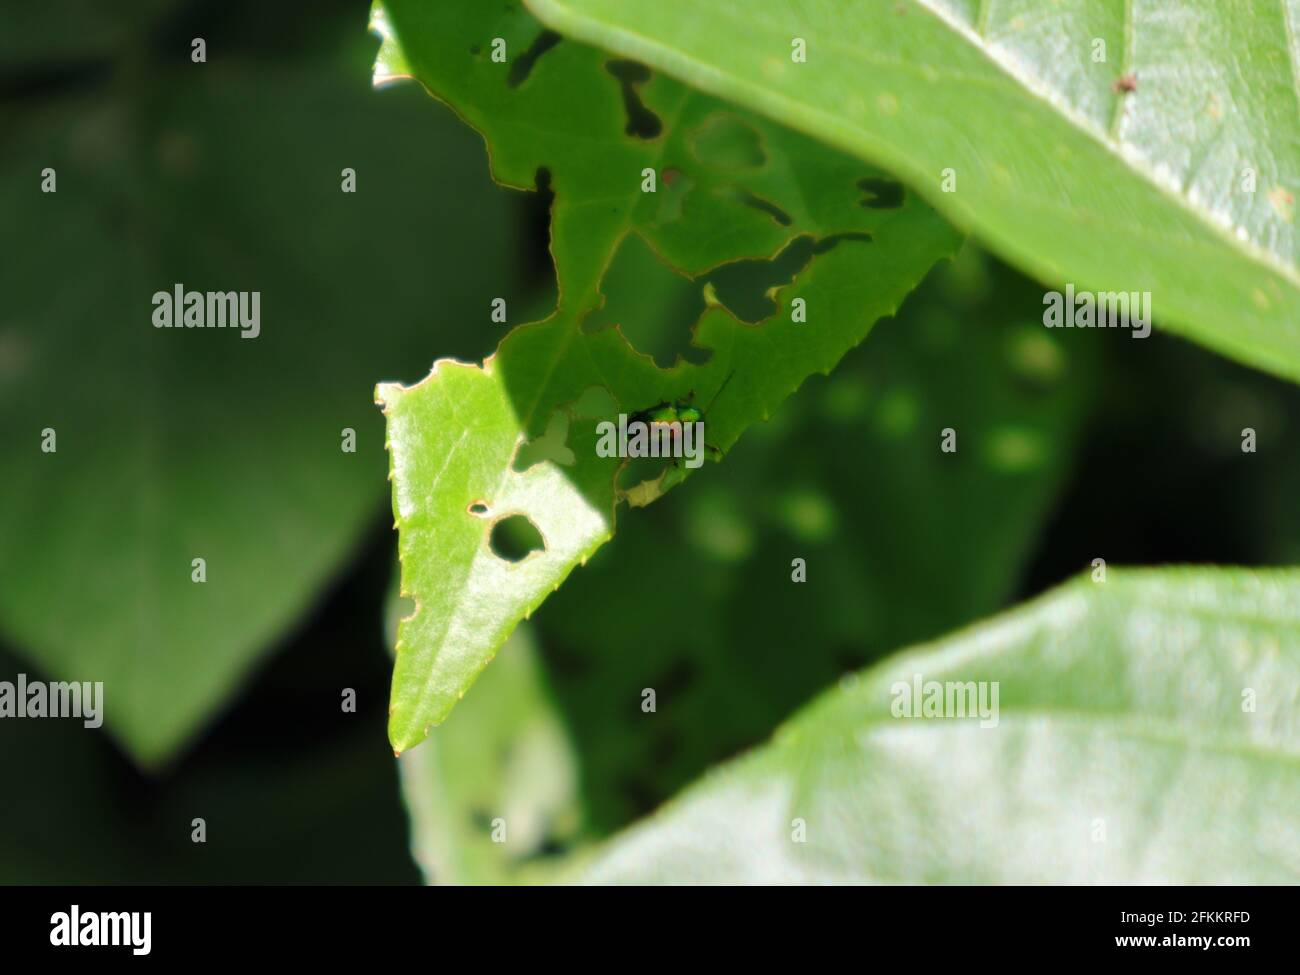 Overhead view of a metallic golden green color beetle hiding on a green leaf Stock Photo